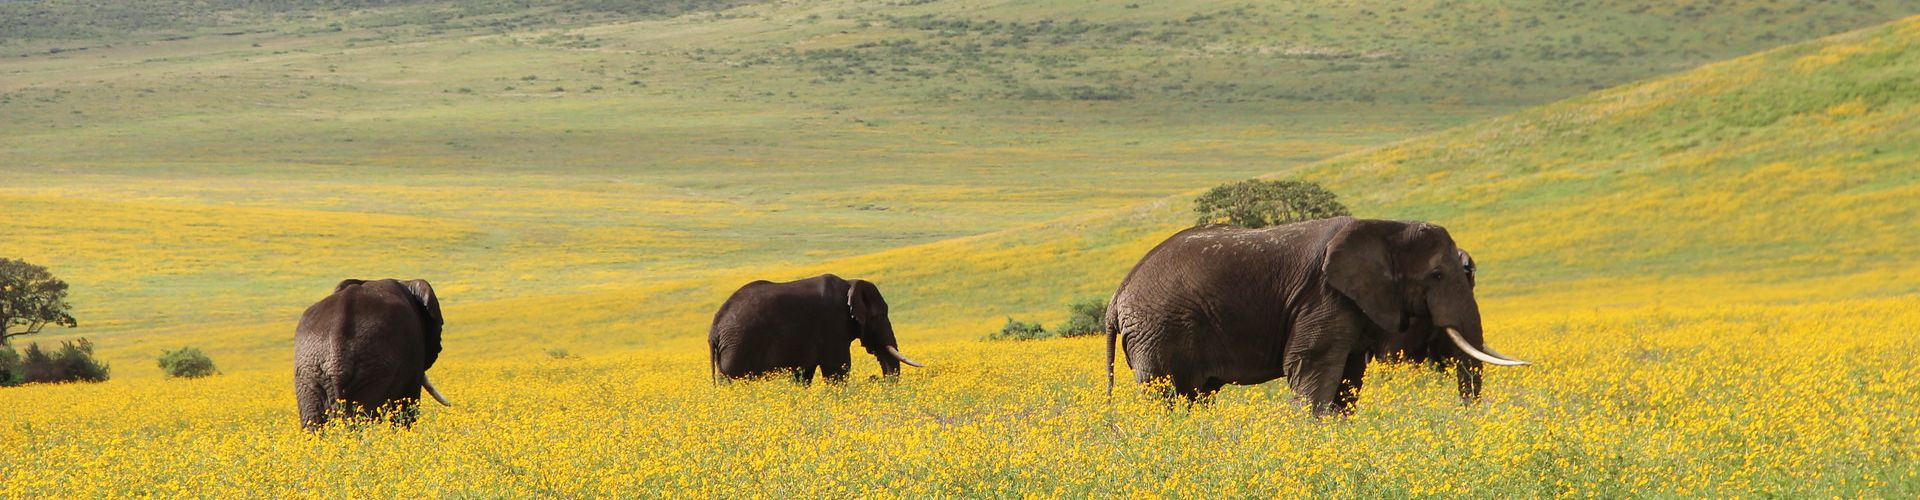 Our 4 Days Safari Tanzania brings you to the elephants of the Ngorongoro Conservation Area